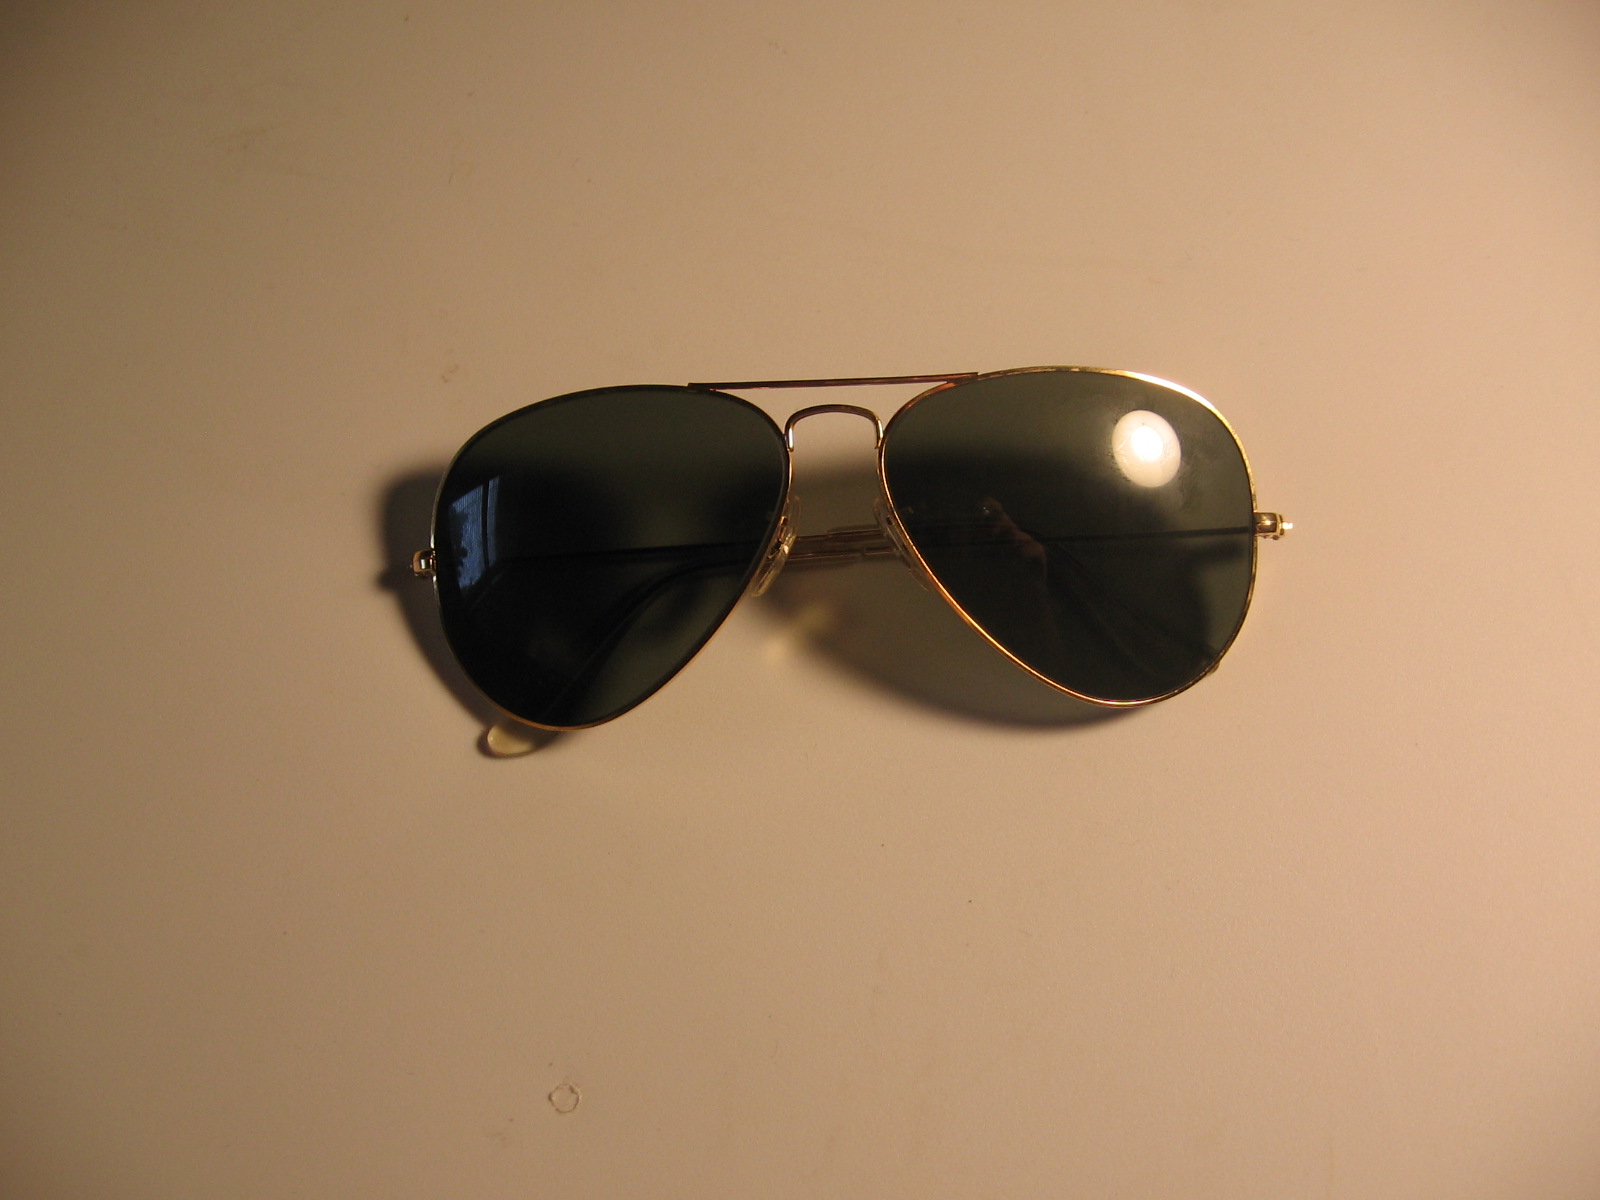 Vintage Ray Ban Expert | Page 2 | Styleforum